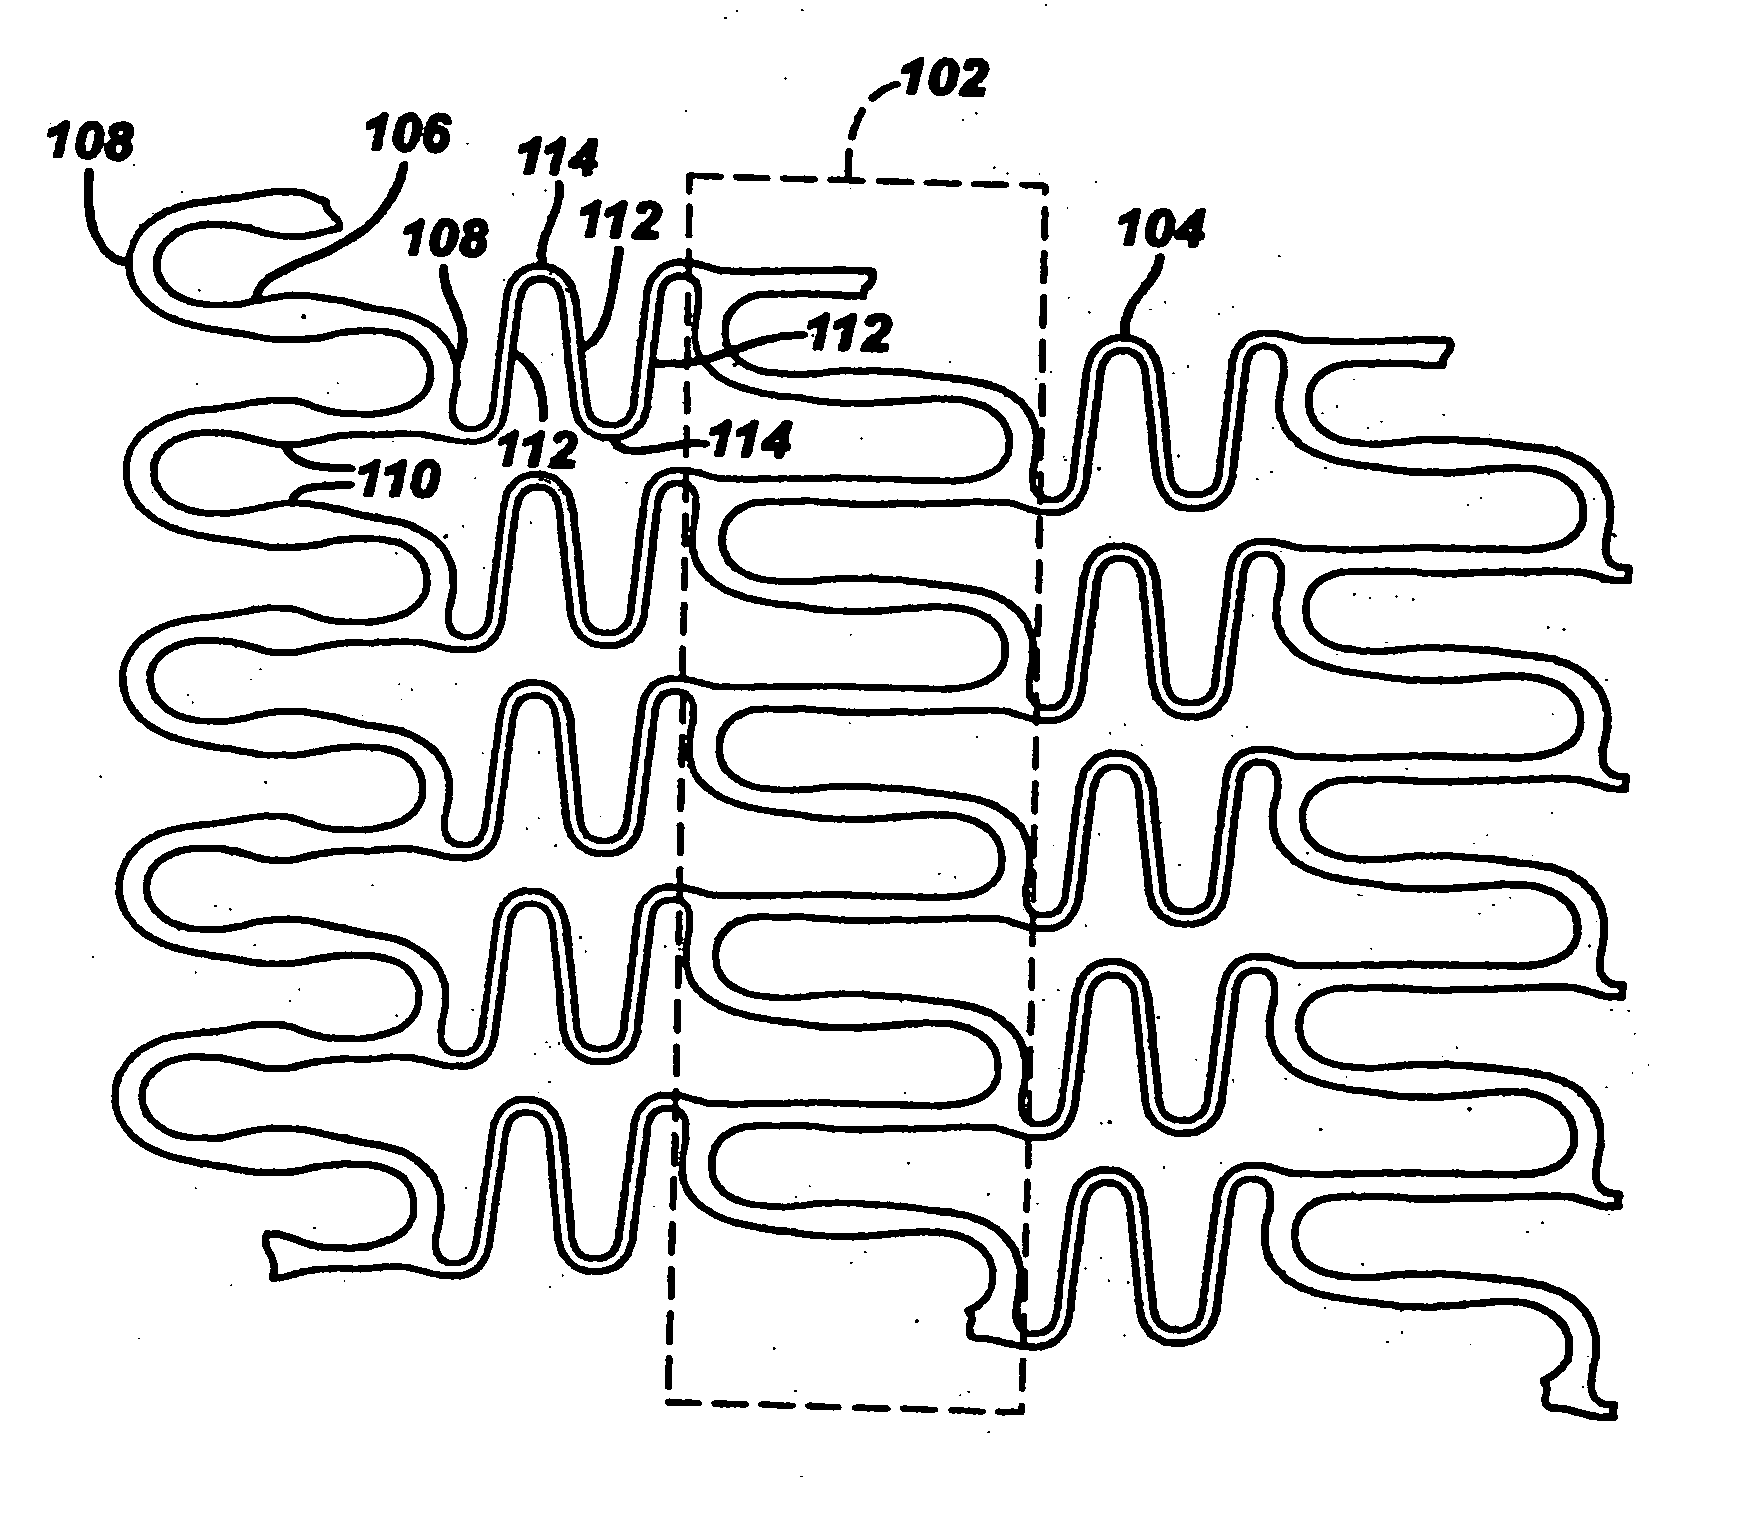 Polymeric stent having modified molecular structures in both the hoops and selected segments of the flexible connectors